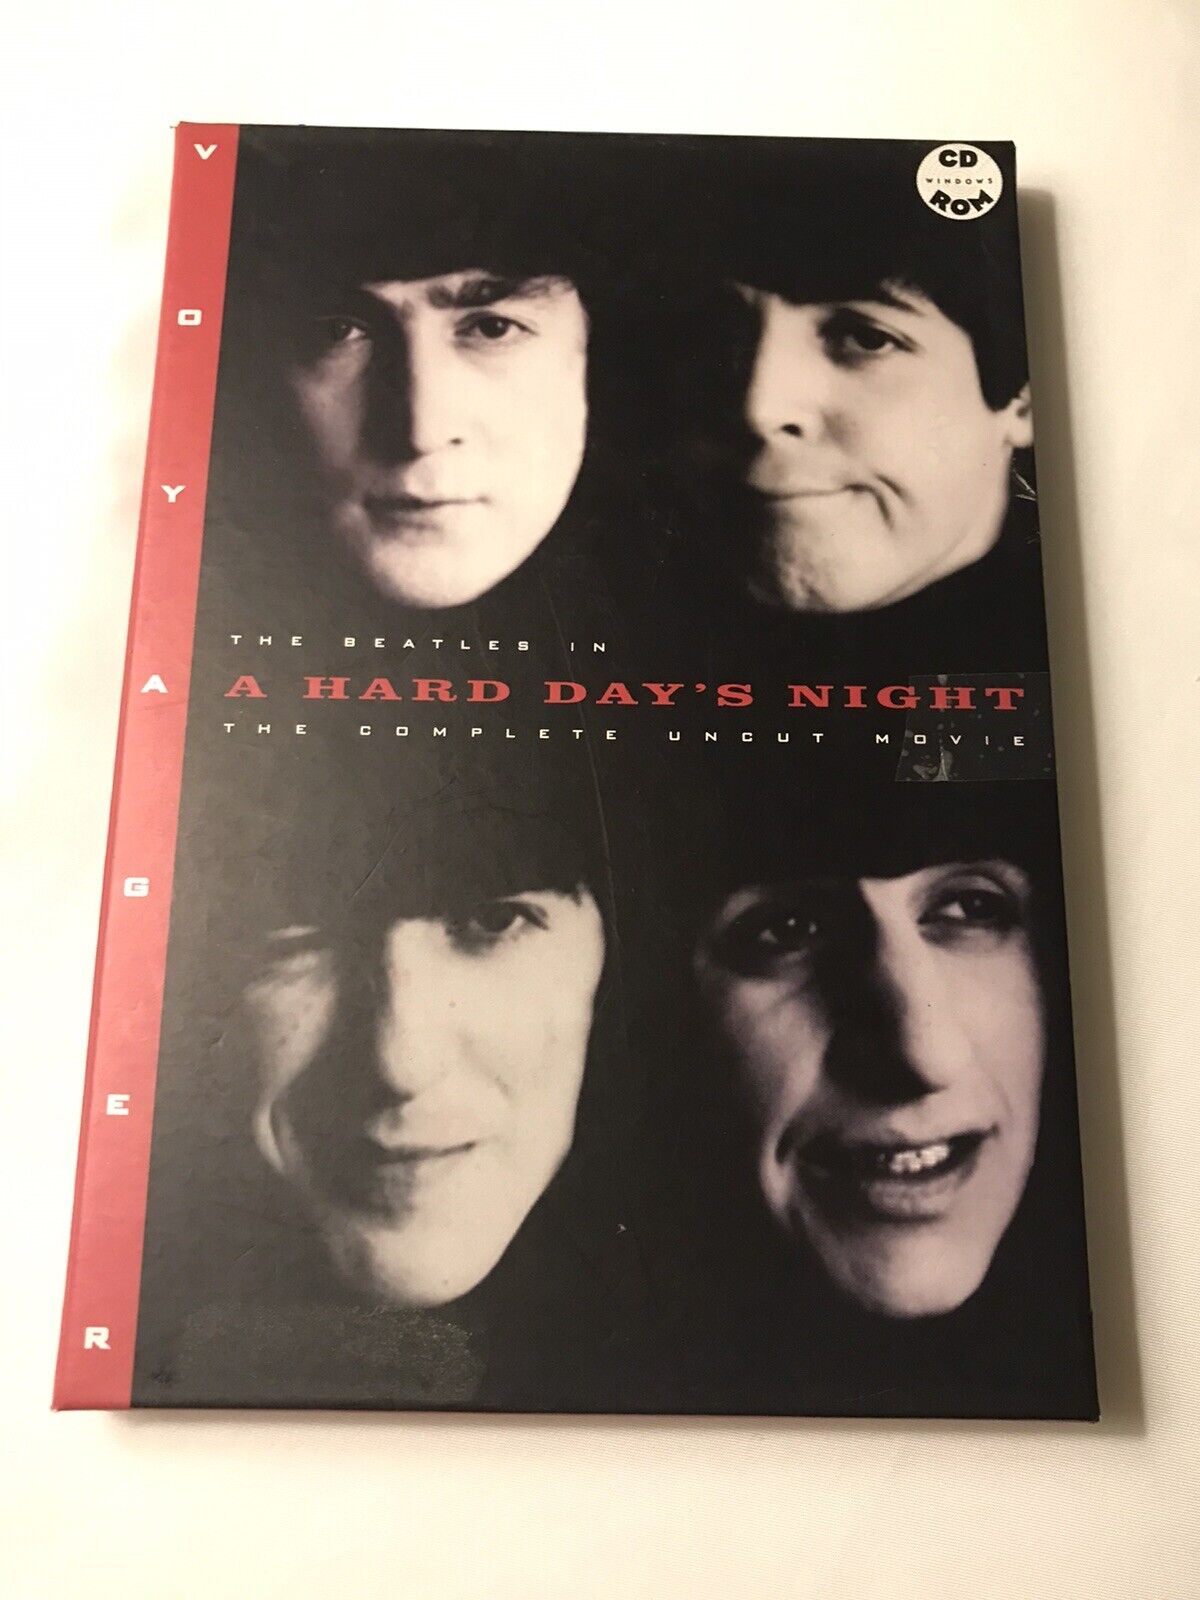 The Beatles A Hard Day’s Night The Complete Uncut Movie CD ROM 1993 PC Windows 